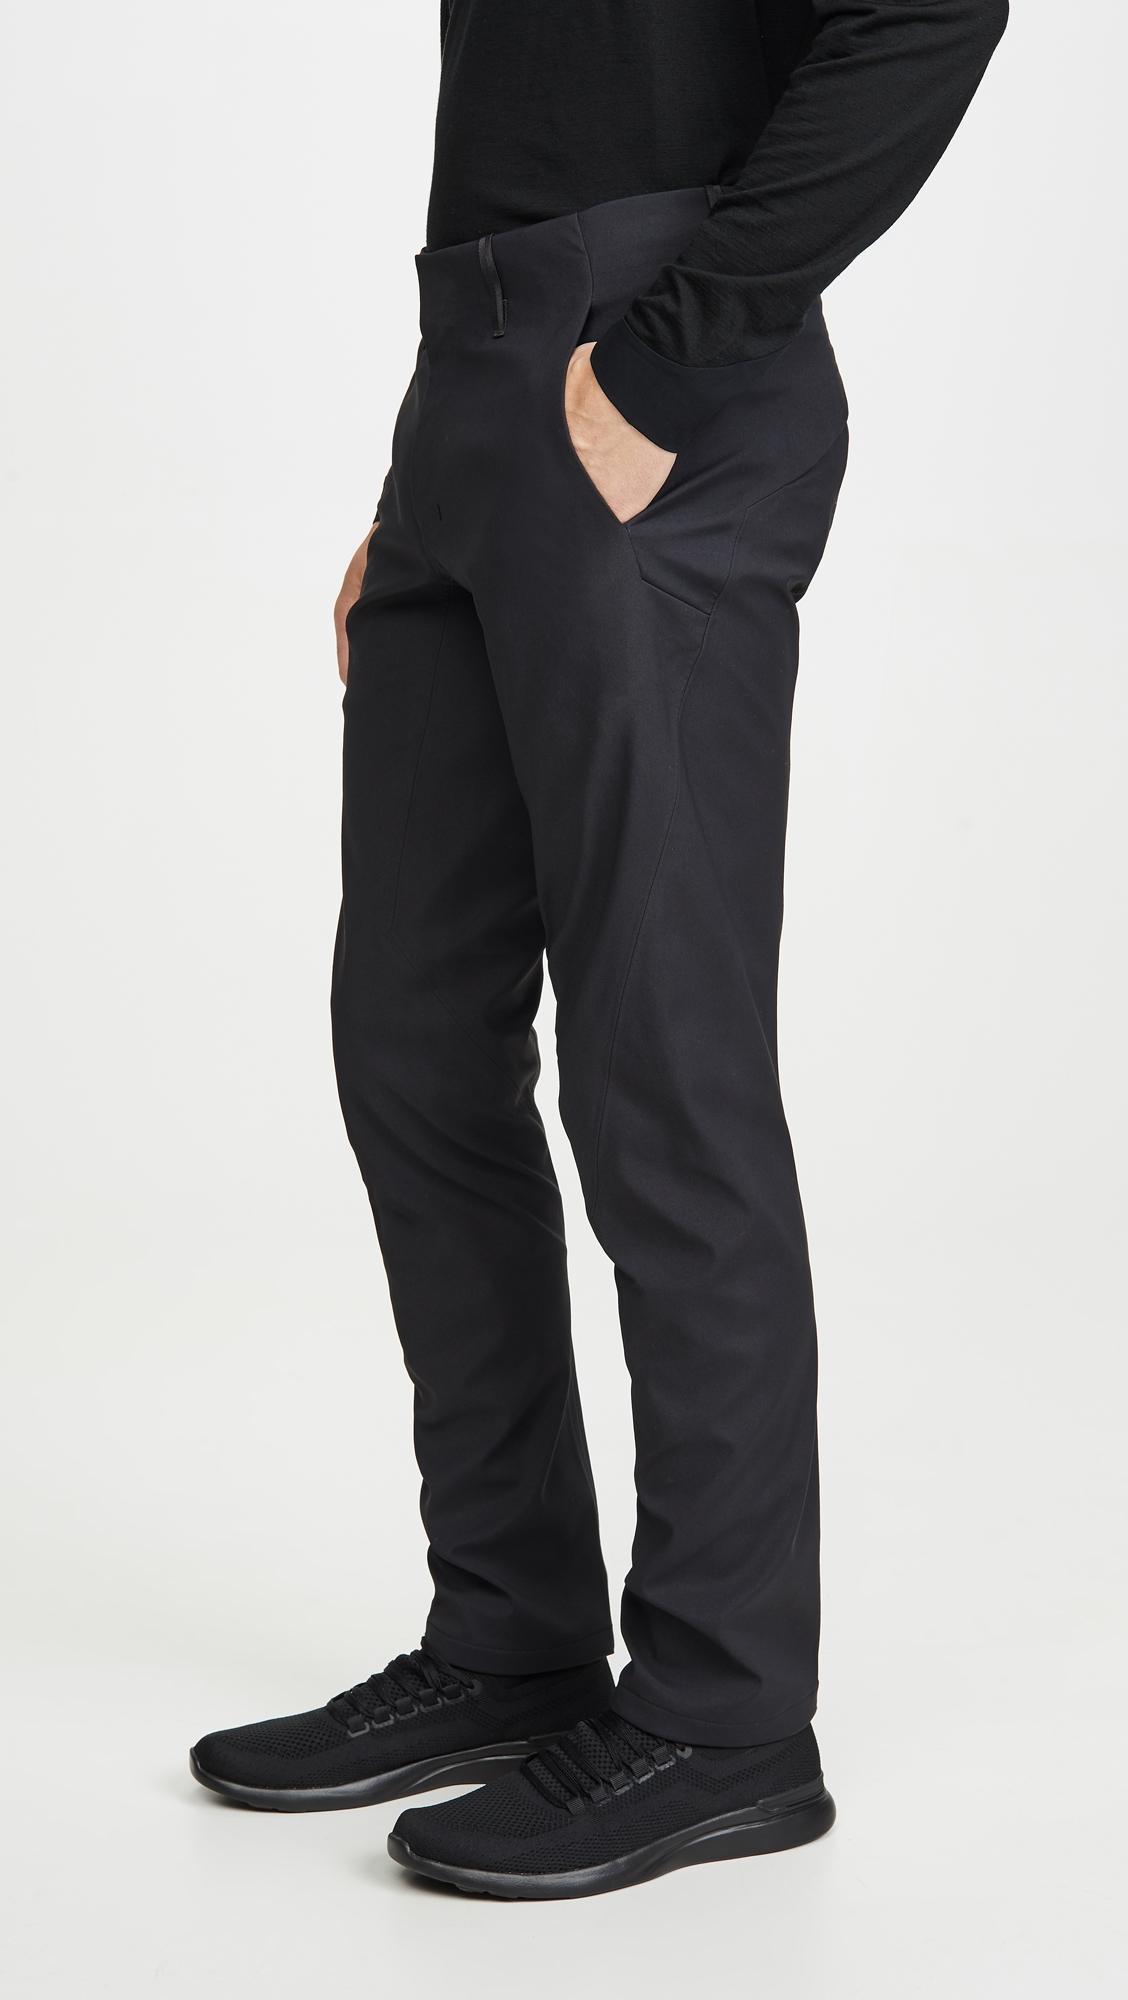 Arc'teryx Synthetic Indisce Pants in Black for Men - Lyst